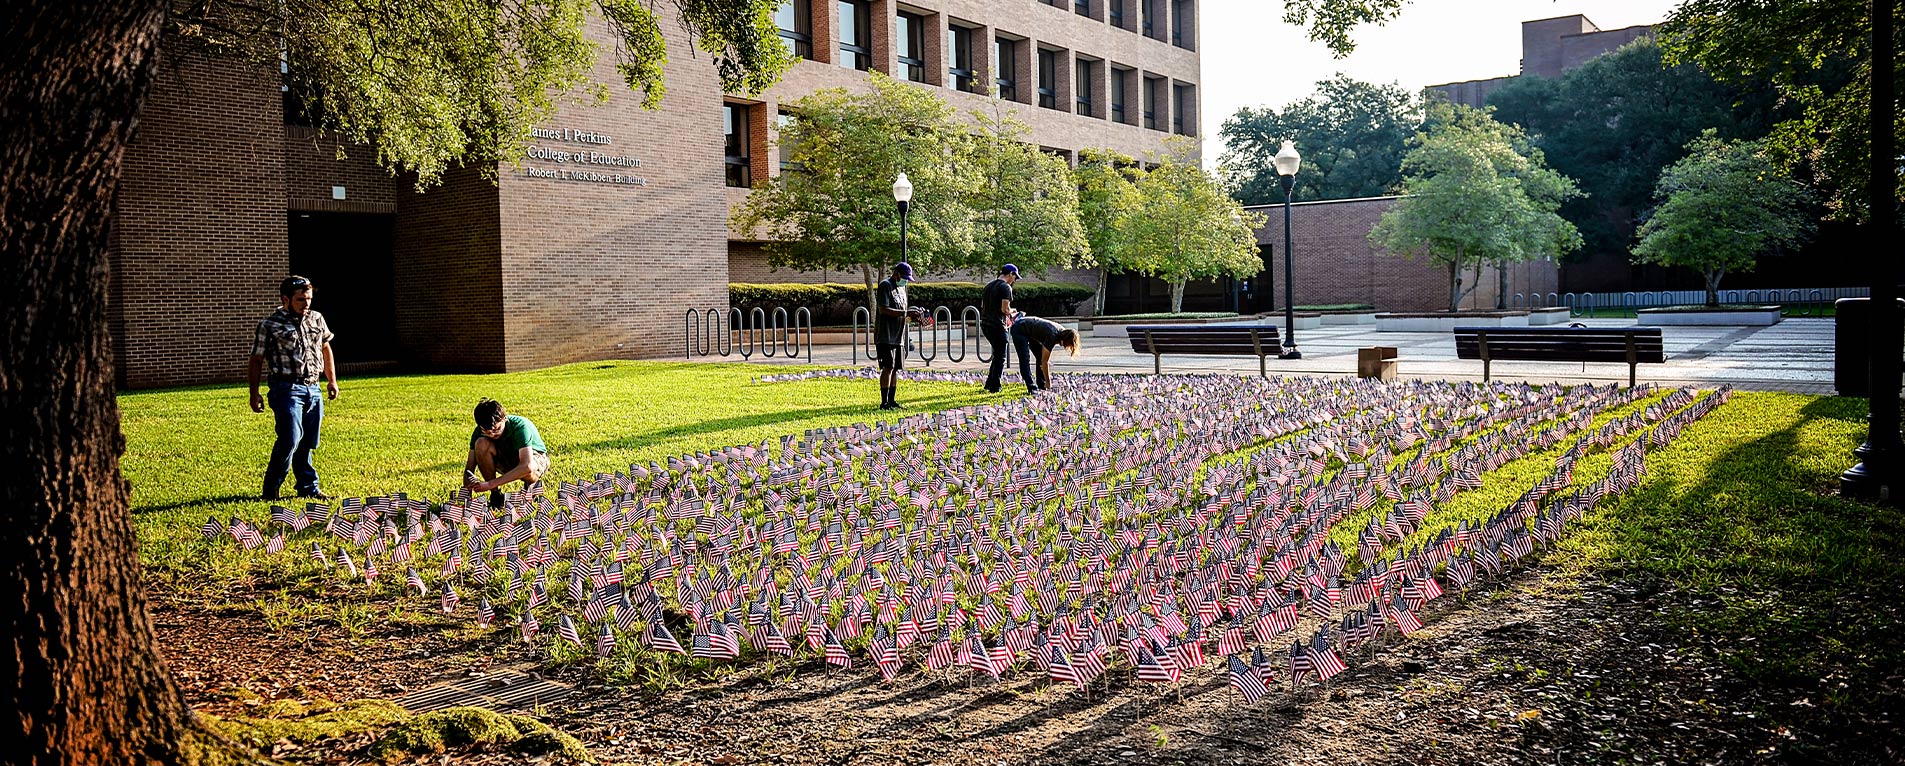 SFA's Young Conservatives of Texas and volunteers place 2,977 American flags — one for each person who died during the terrorist attacks Sept. 11, 2001 — outside the McKibben Education Building to commemorate the 19th anniversary. Photo by Robin Johnson